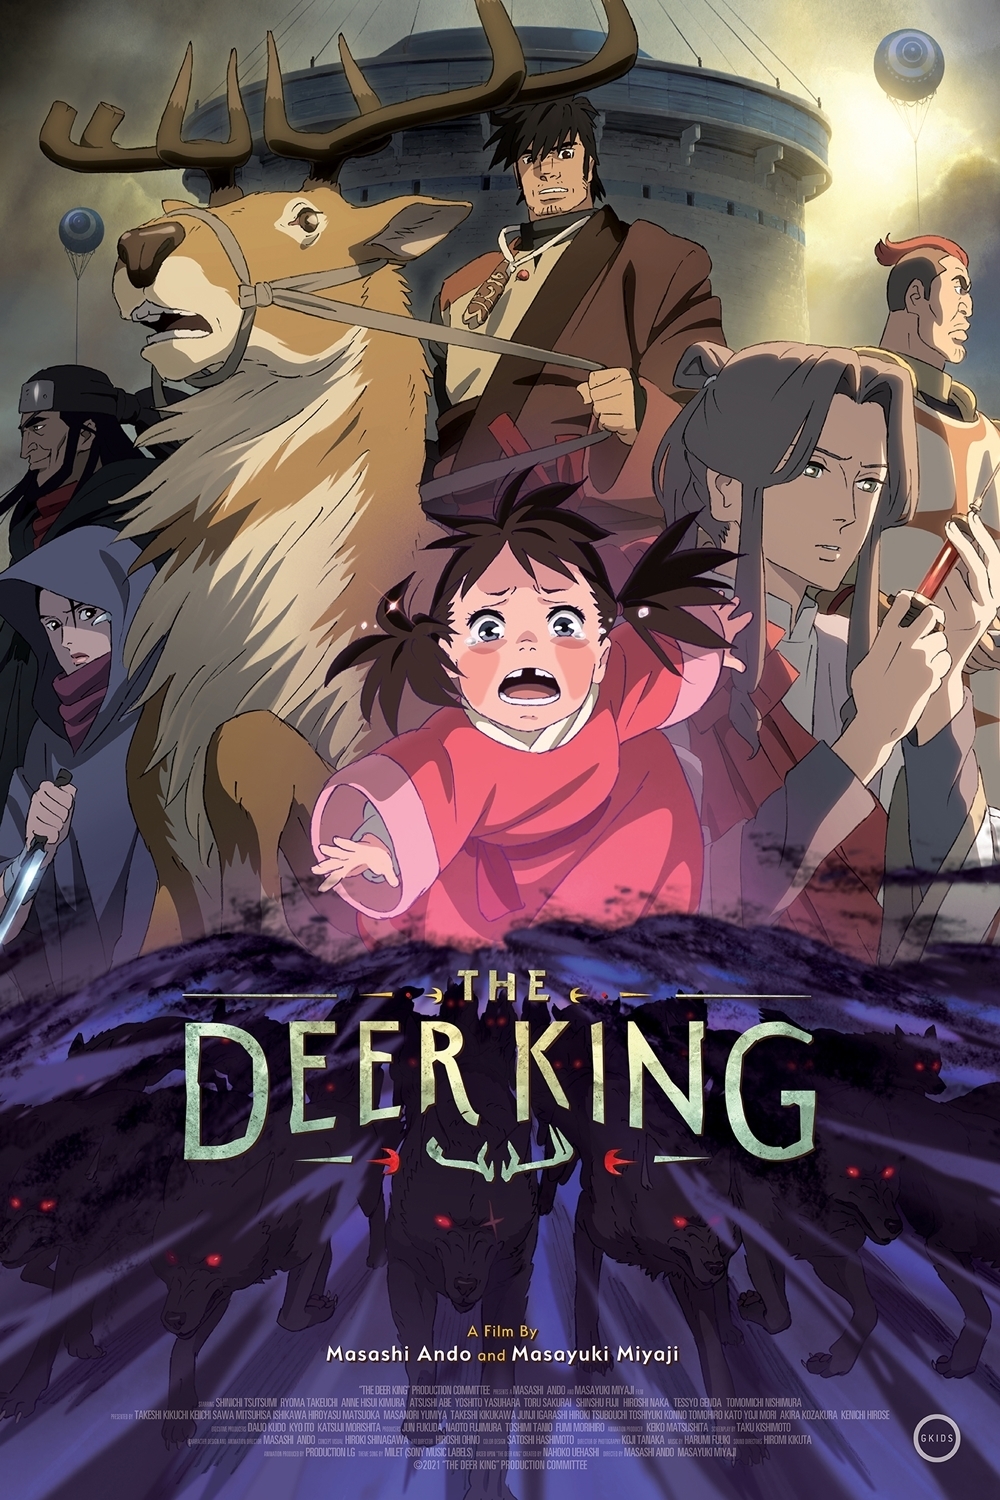 Poster of The Deer King